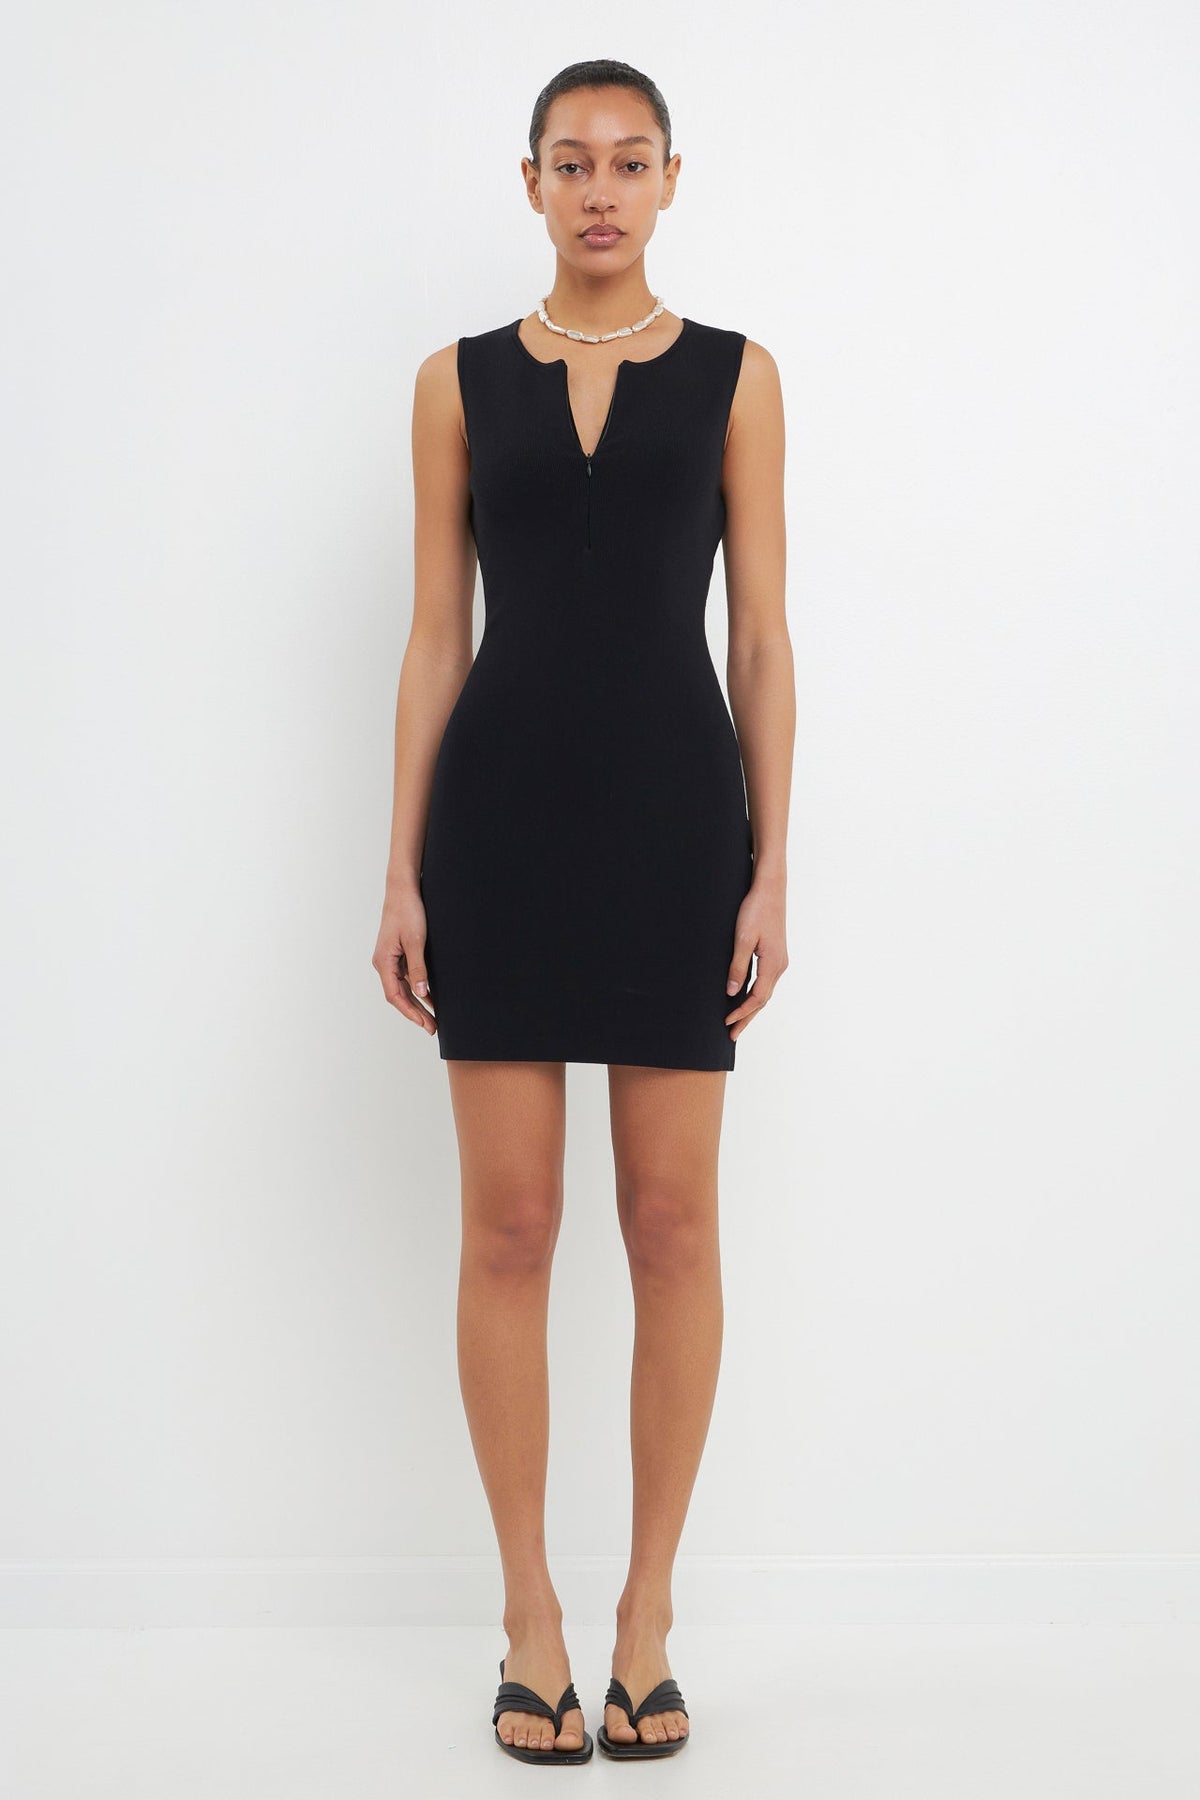 GREY LAB - Front Zip Sleeveless Knit Mini Dress - DRESSES available at Objectrare